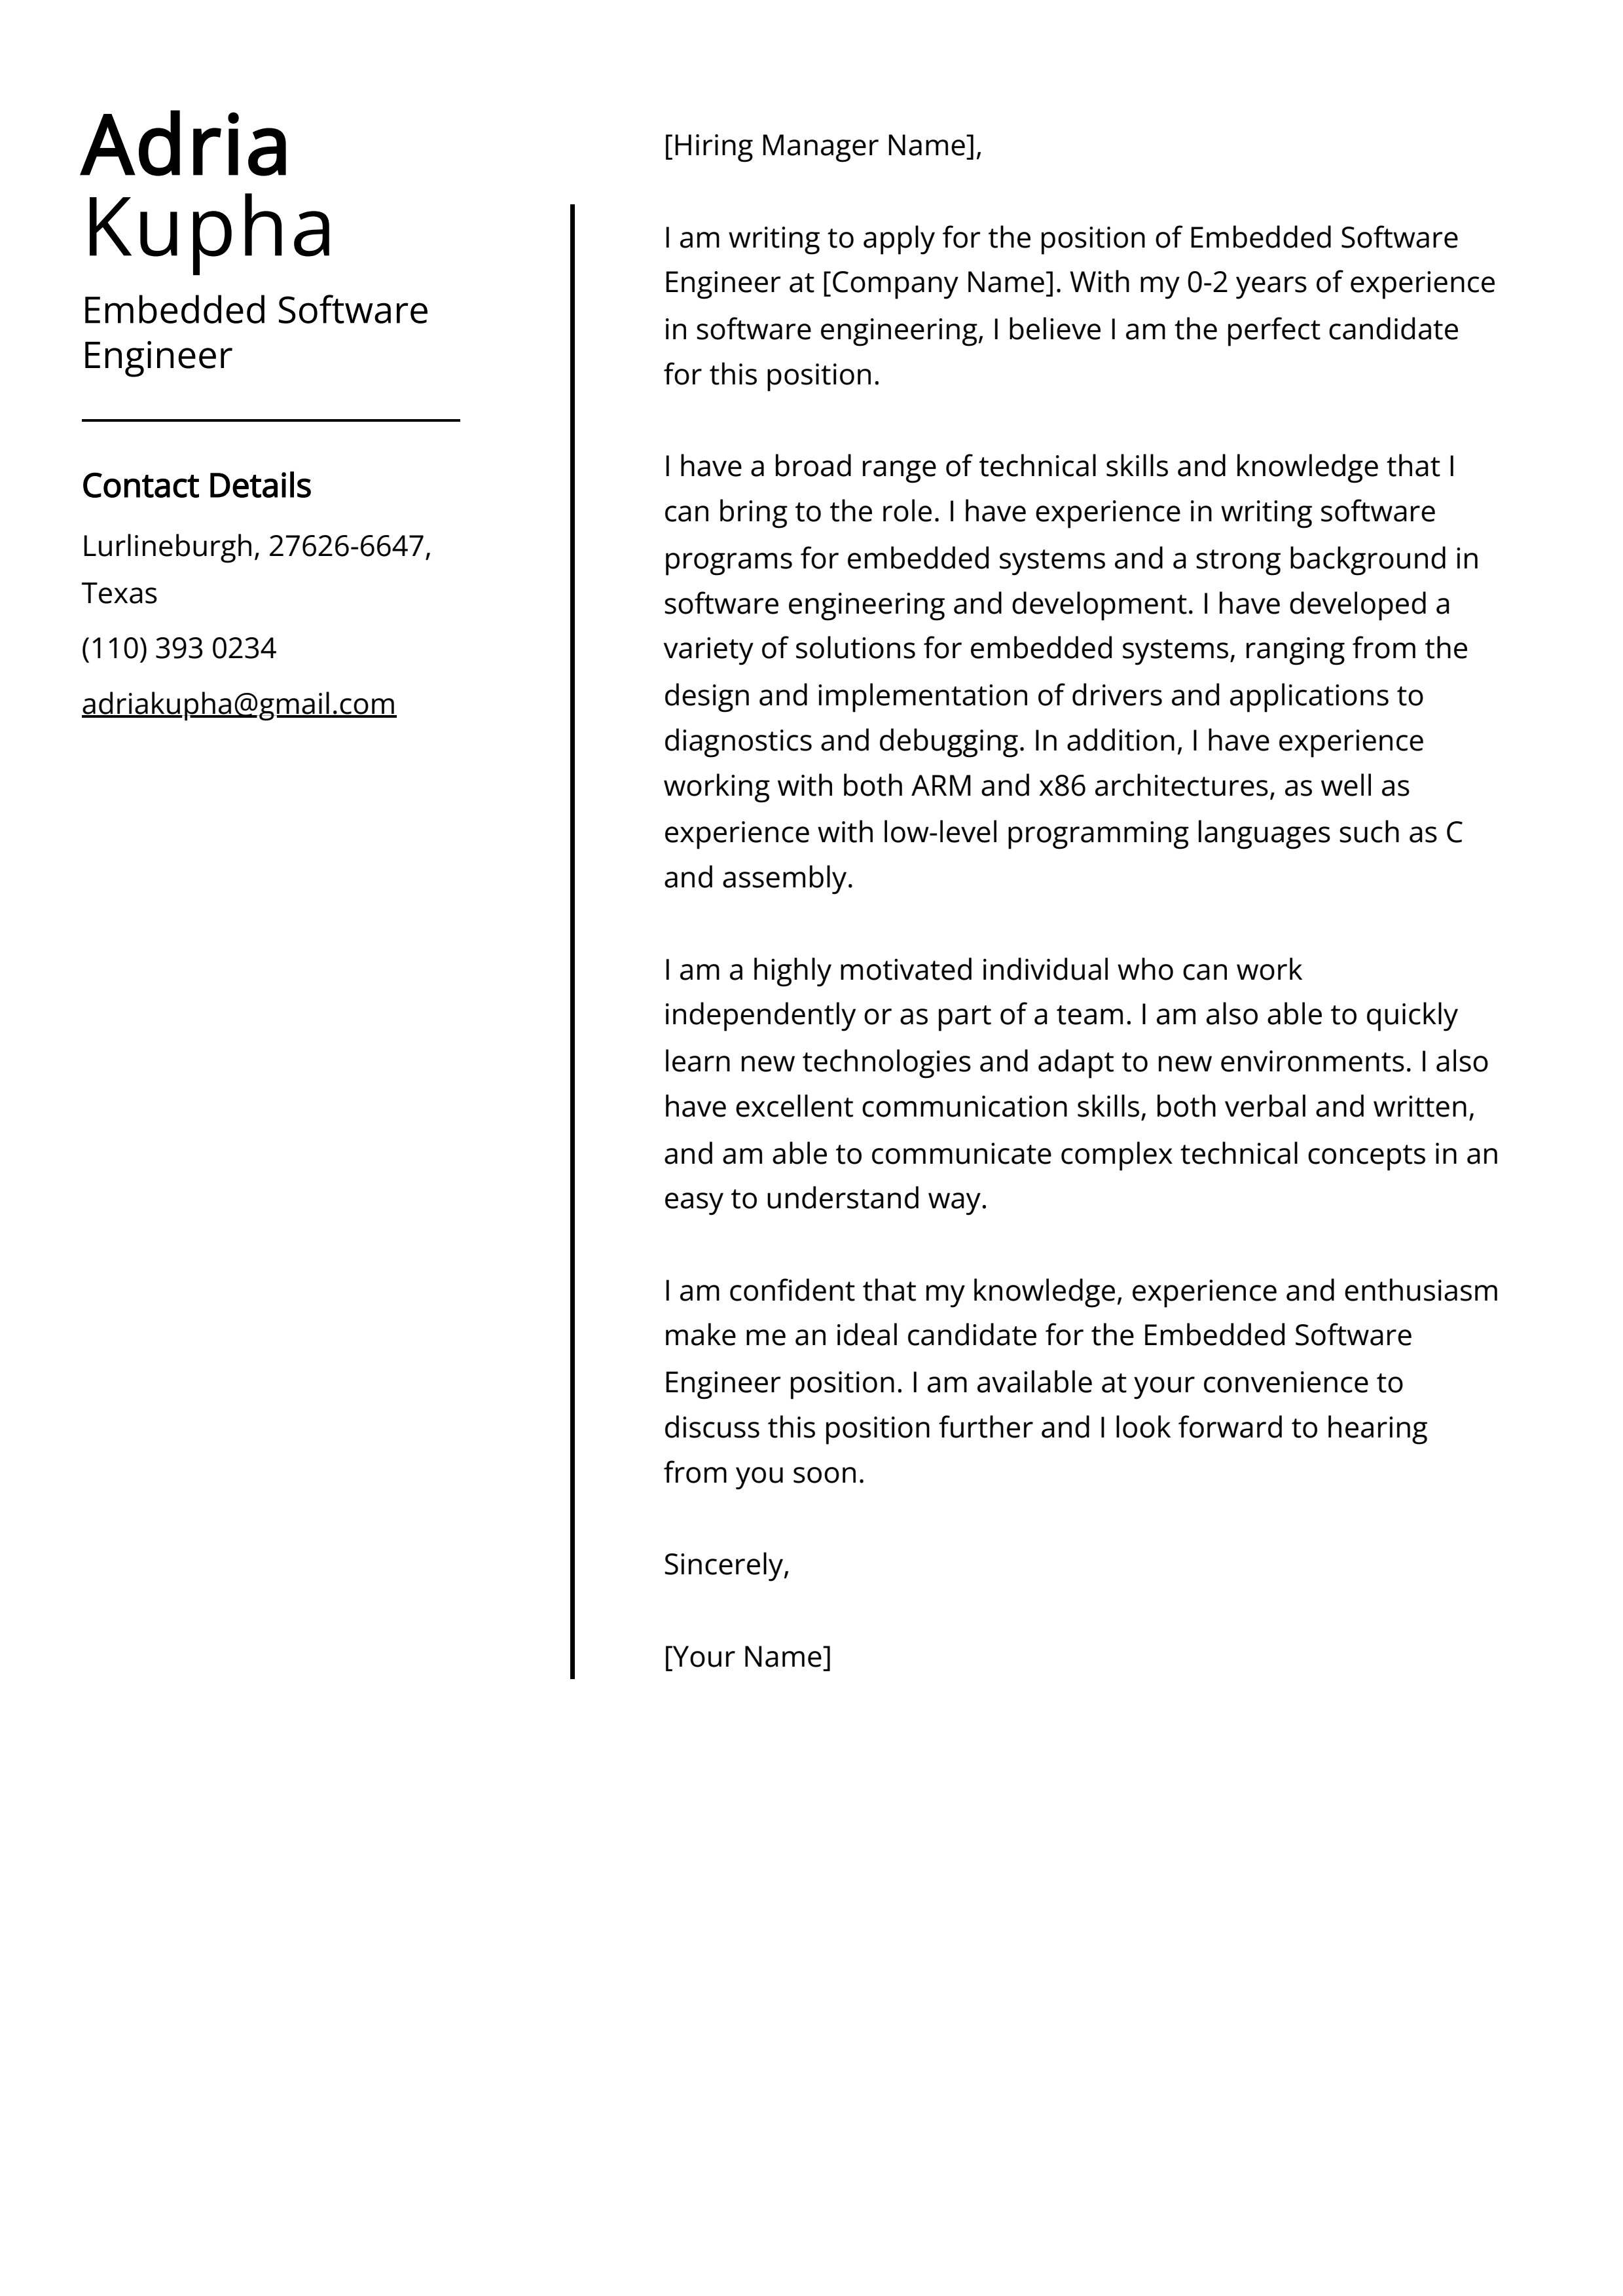 Embedded Software Engineer Cover Letter Example